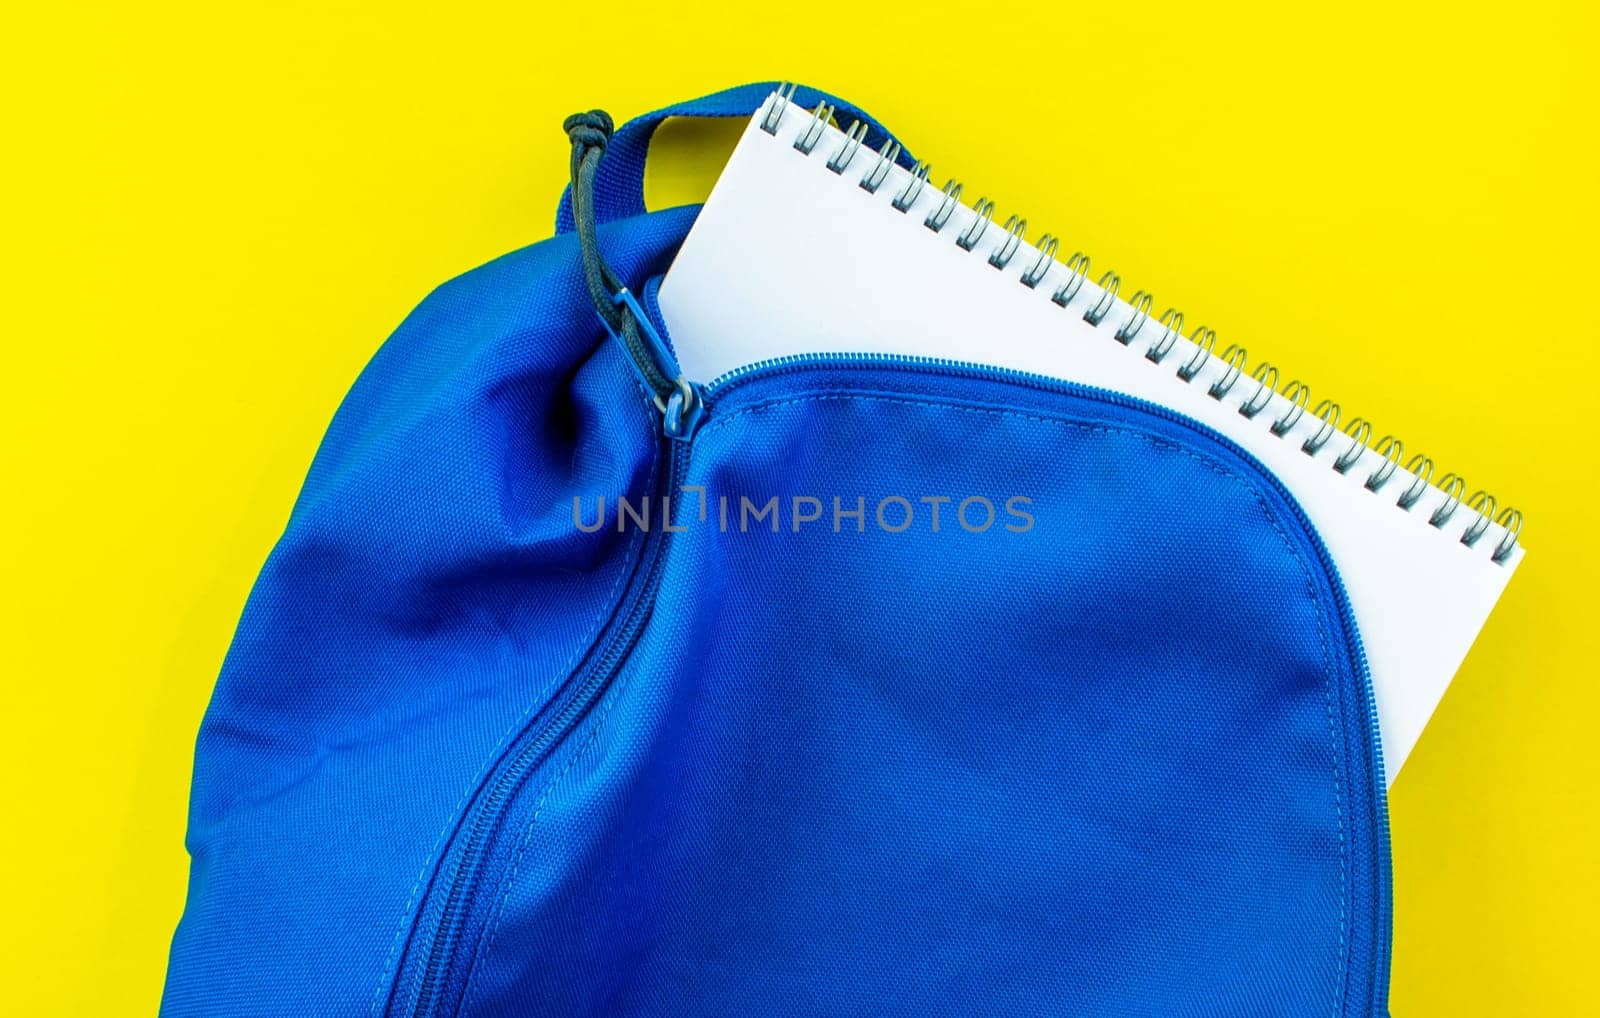 School backpack and notebook on a yellow background. School blue backpack with a notepad inside on a yellow background.